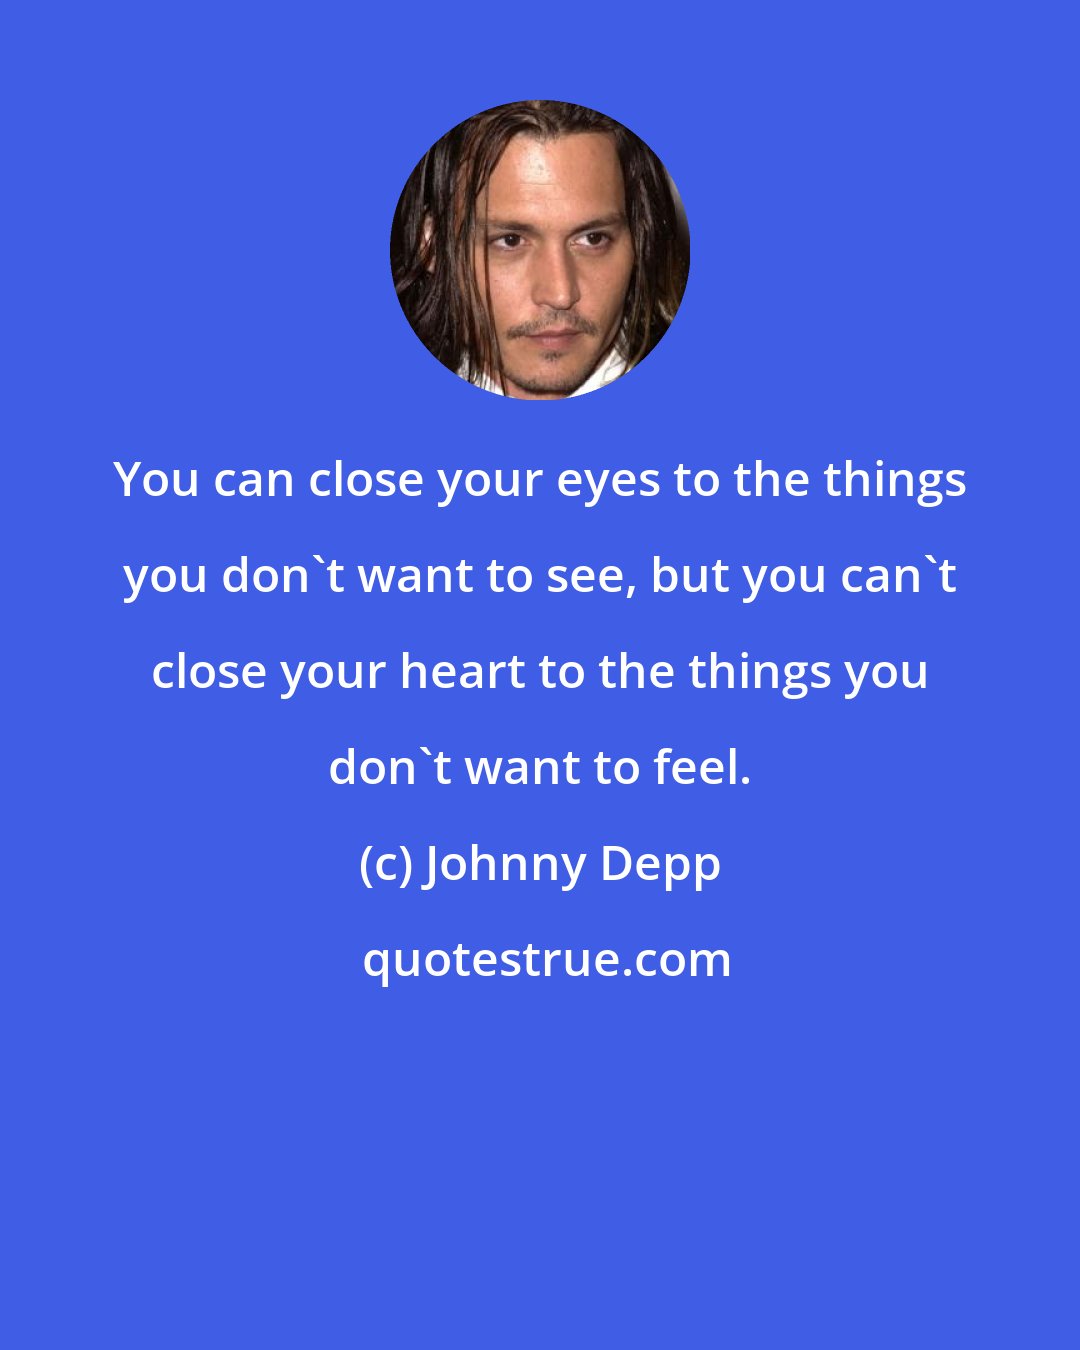 Johnny Depp: You can close your eyes to the things you don't want to see, but you can't close your heart to the things you don't want to feel.